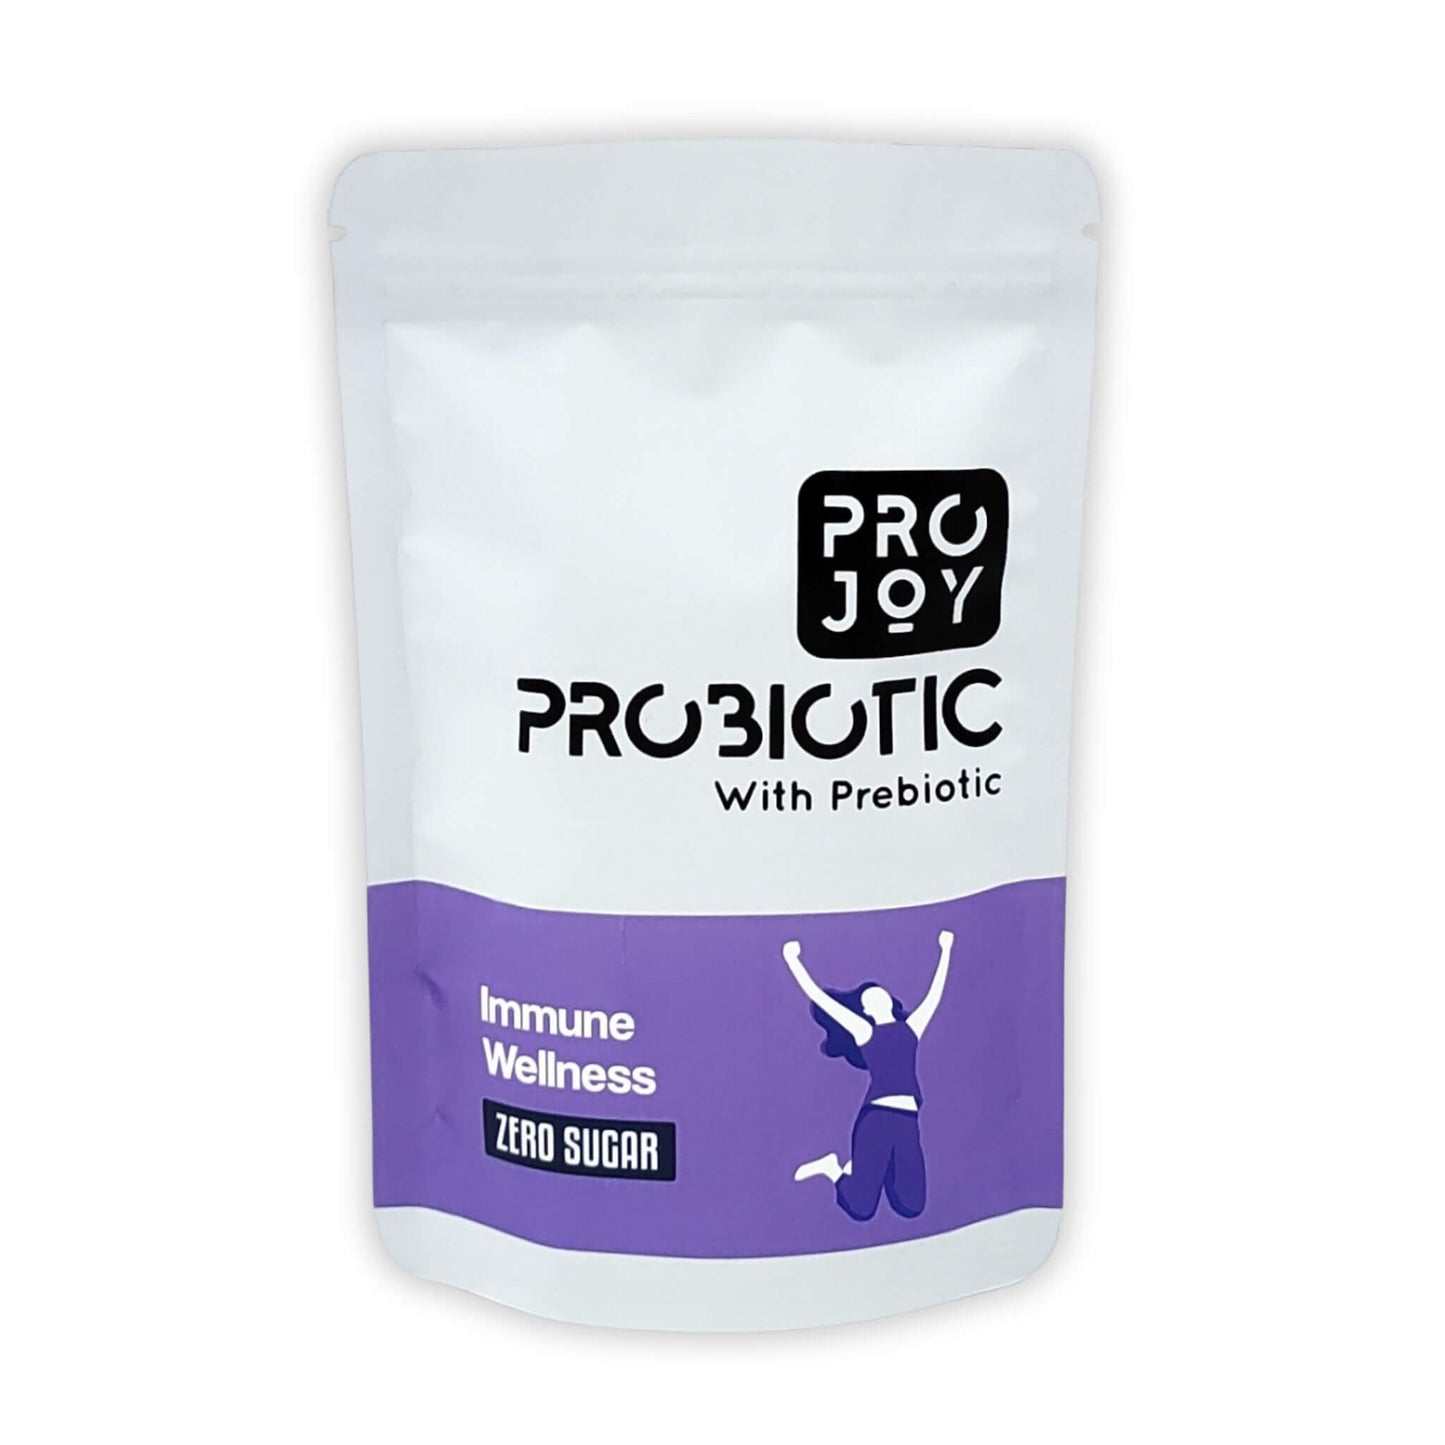 Projoy Probiotic Food Supplement Powder in a Standup Pouch for Improved Immune Health" - The image may show a standup pouch package of Projoy probiotic food supplement powder, featuring the product name and a tagline promoting its benefits for immune health.